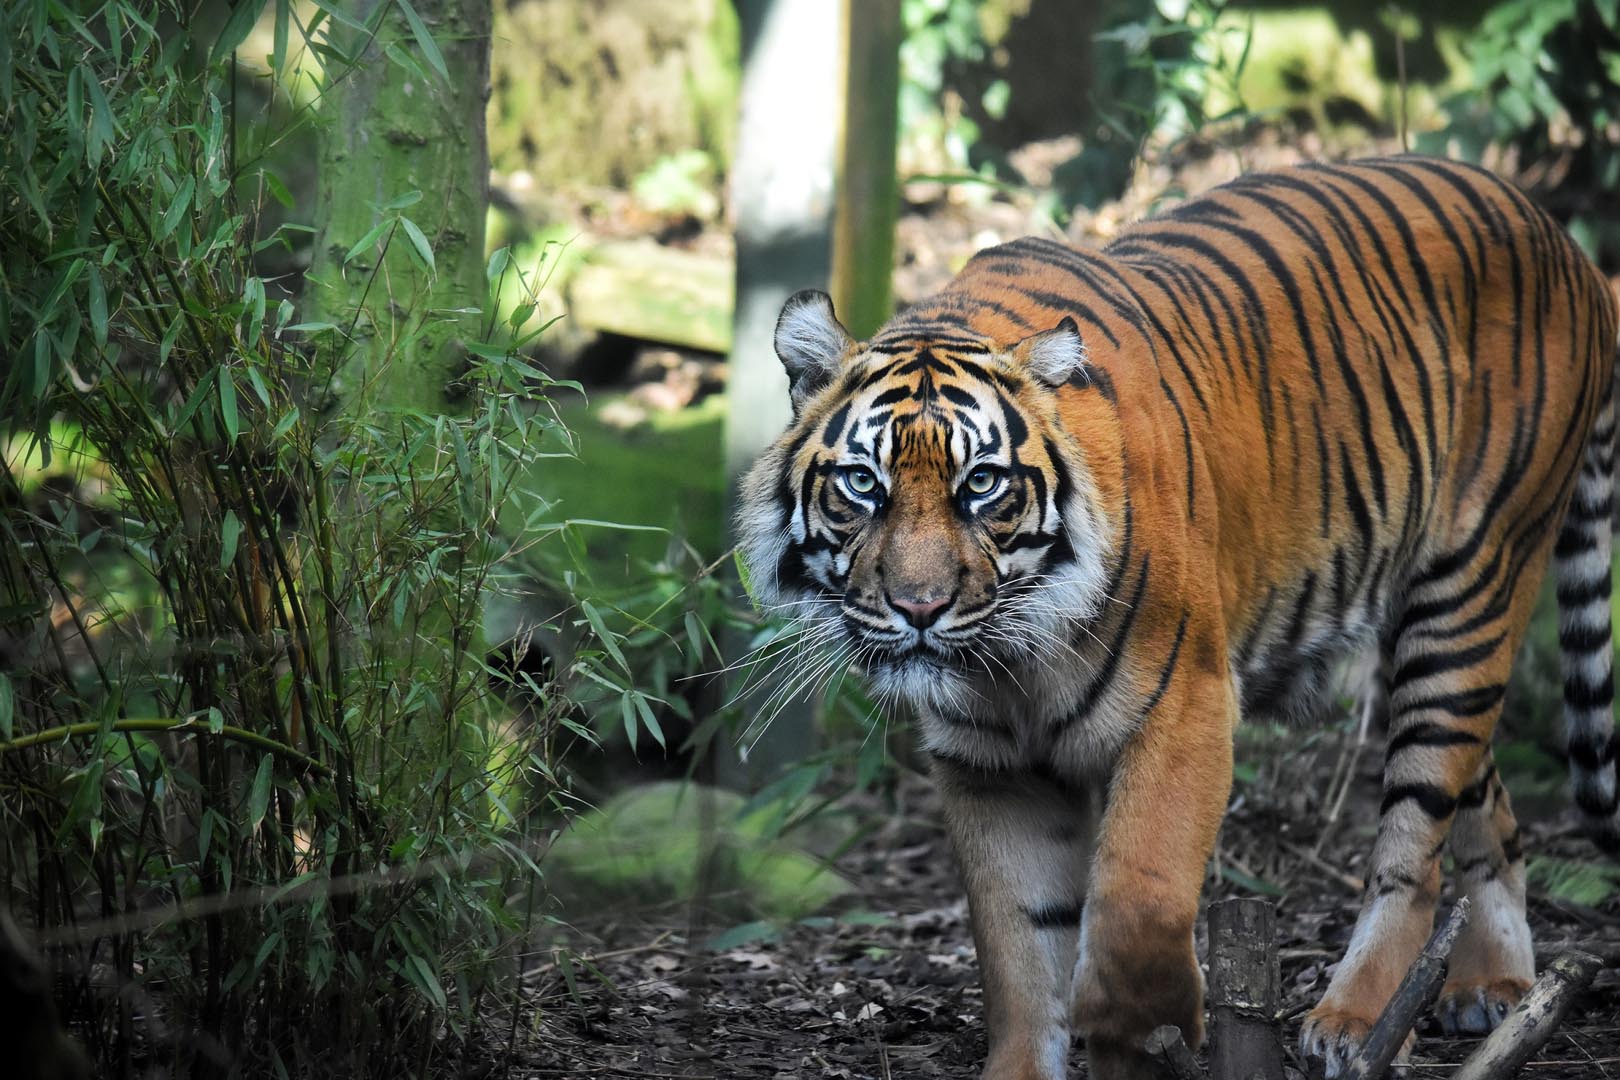 Sumatran tiger Dharma looking directly at camera surrounded by trees IMAGE: Rebecca Parr 2022